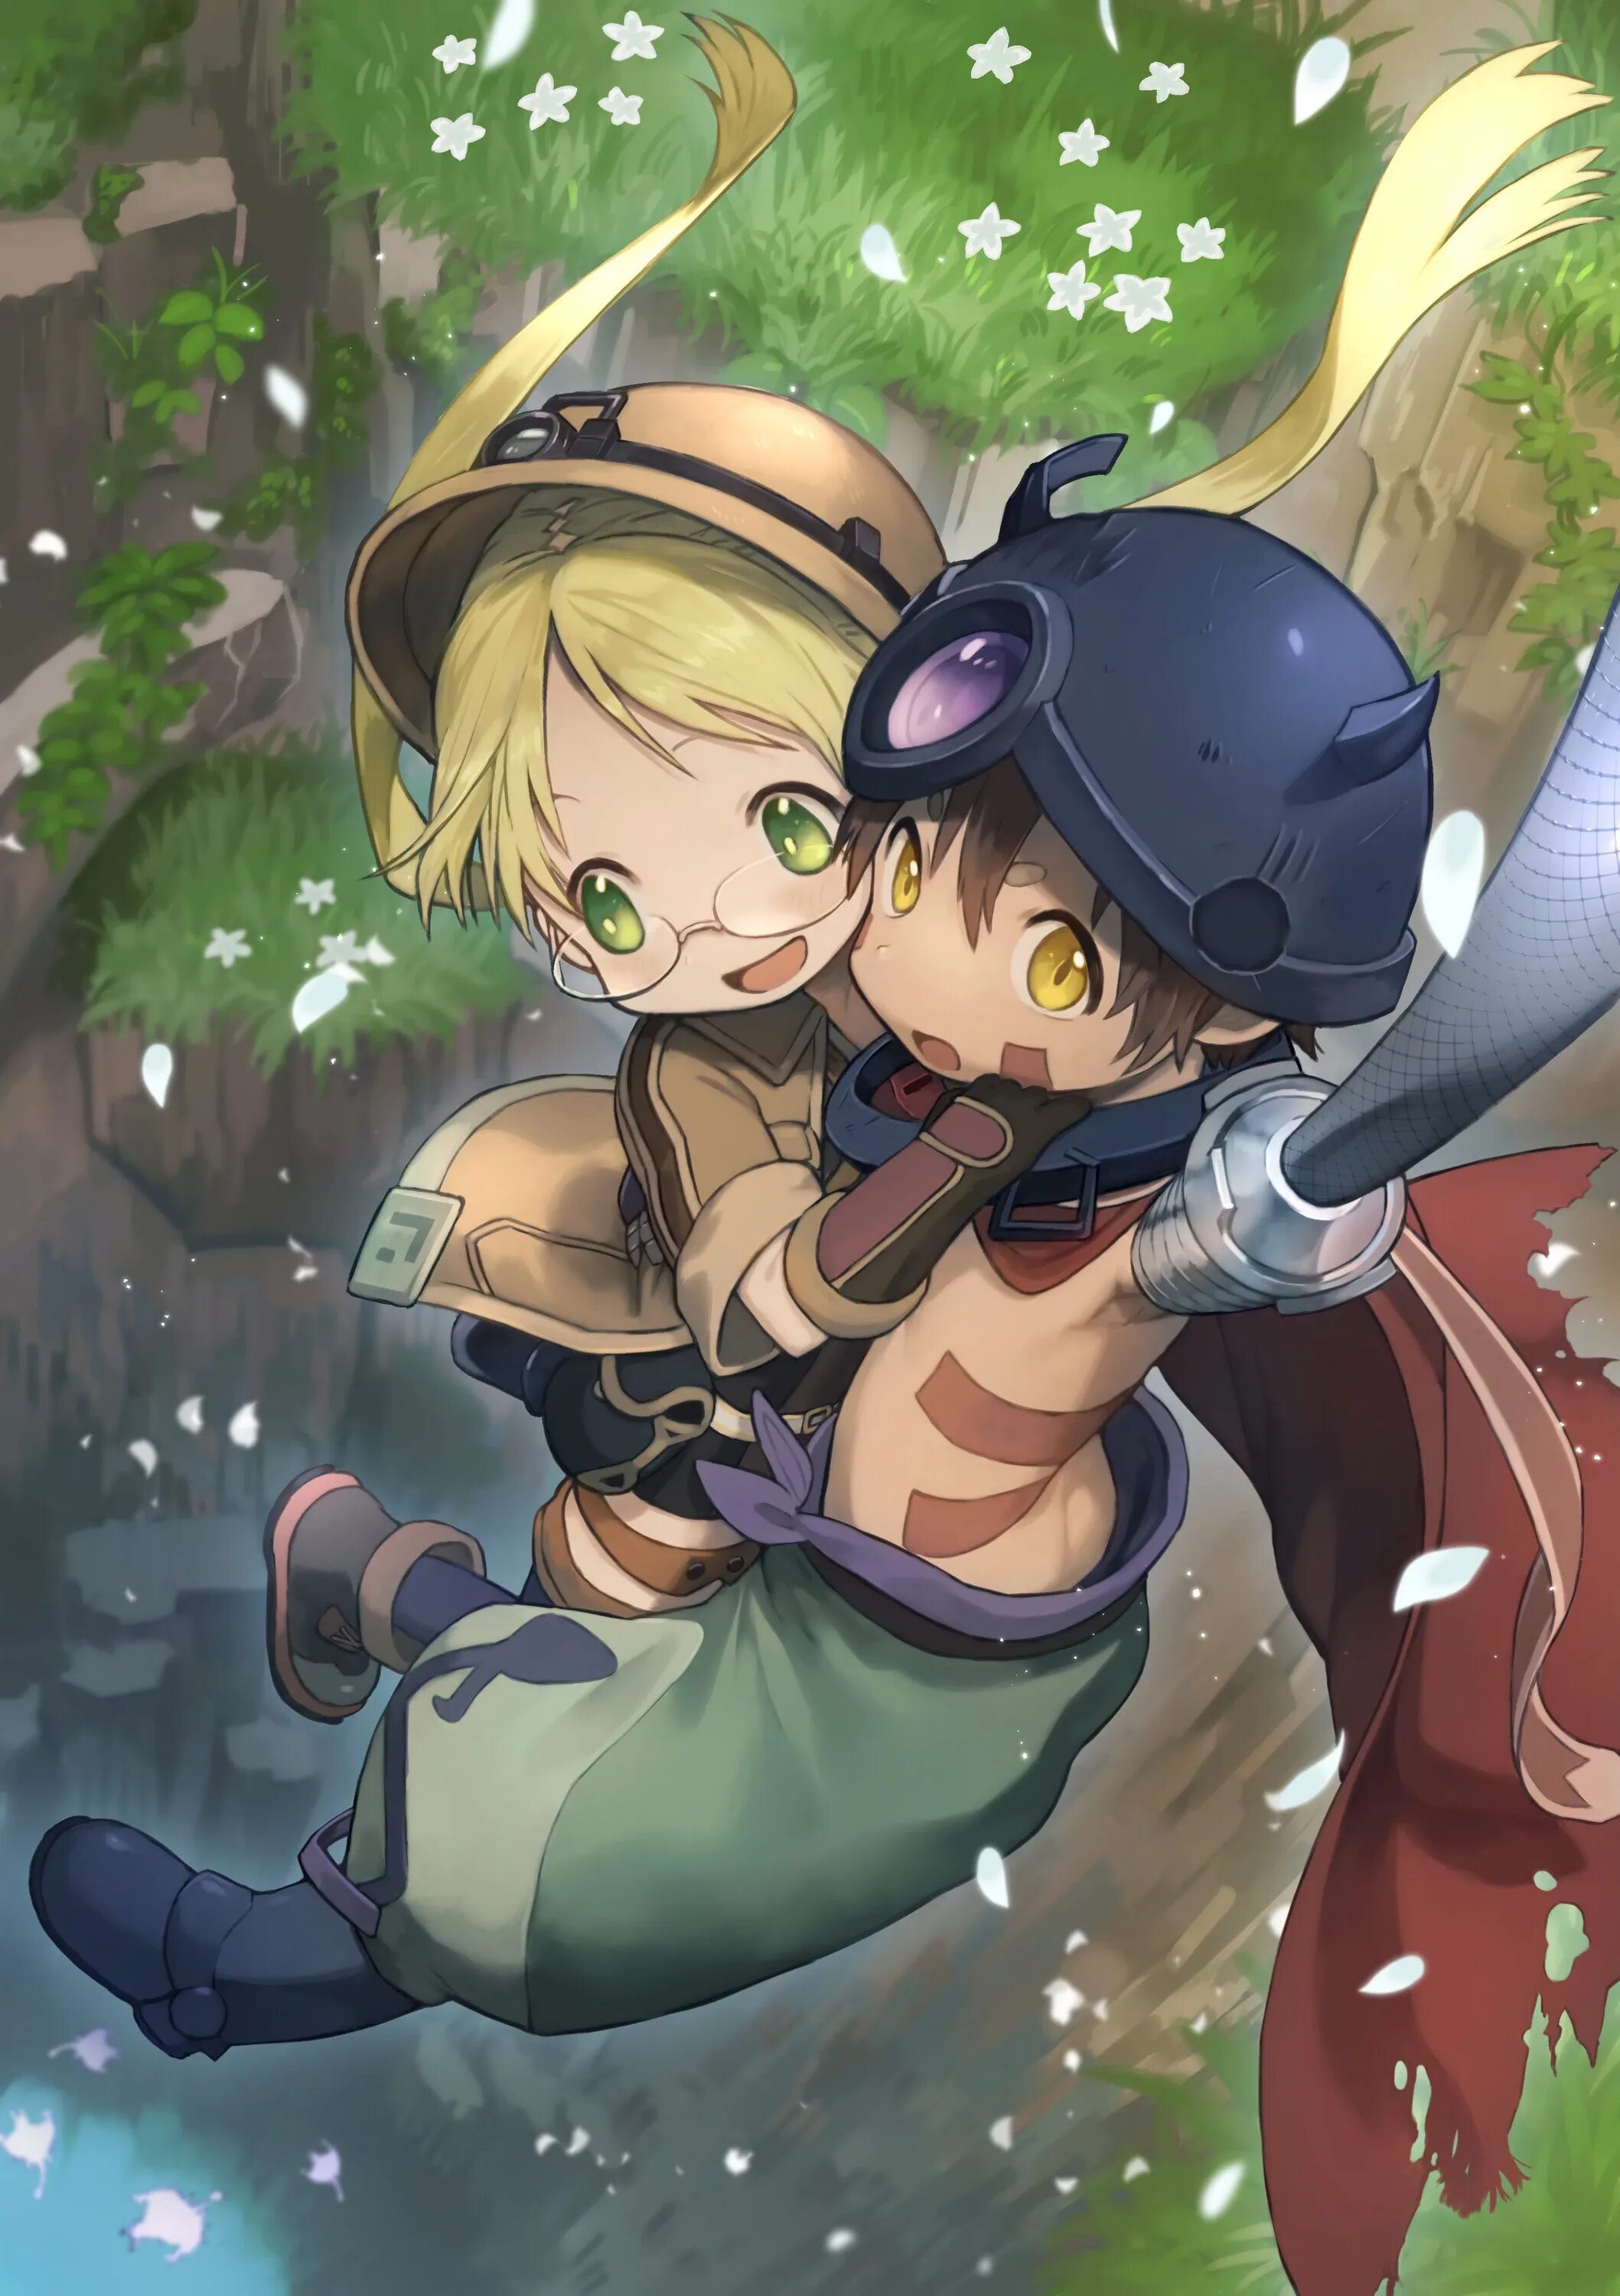 Рико made in Abyss. Made in Abyss Рико и рег. Made in Abyss Рикко. Рико бездна